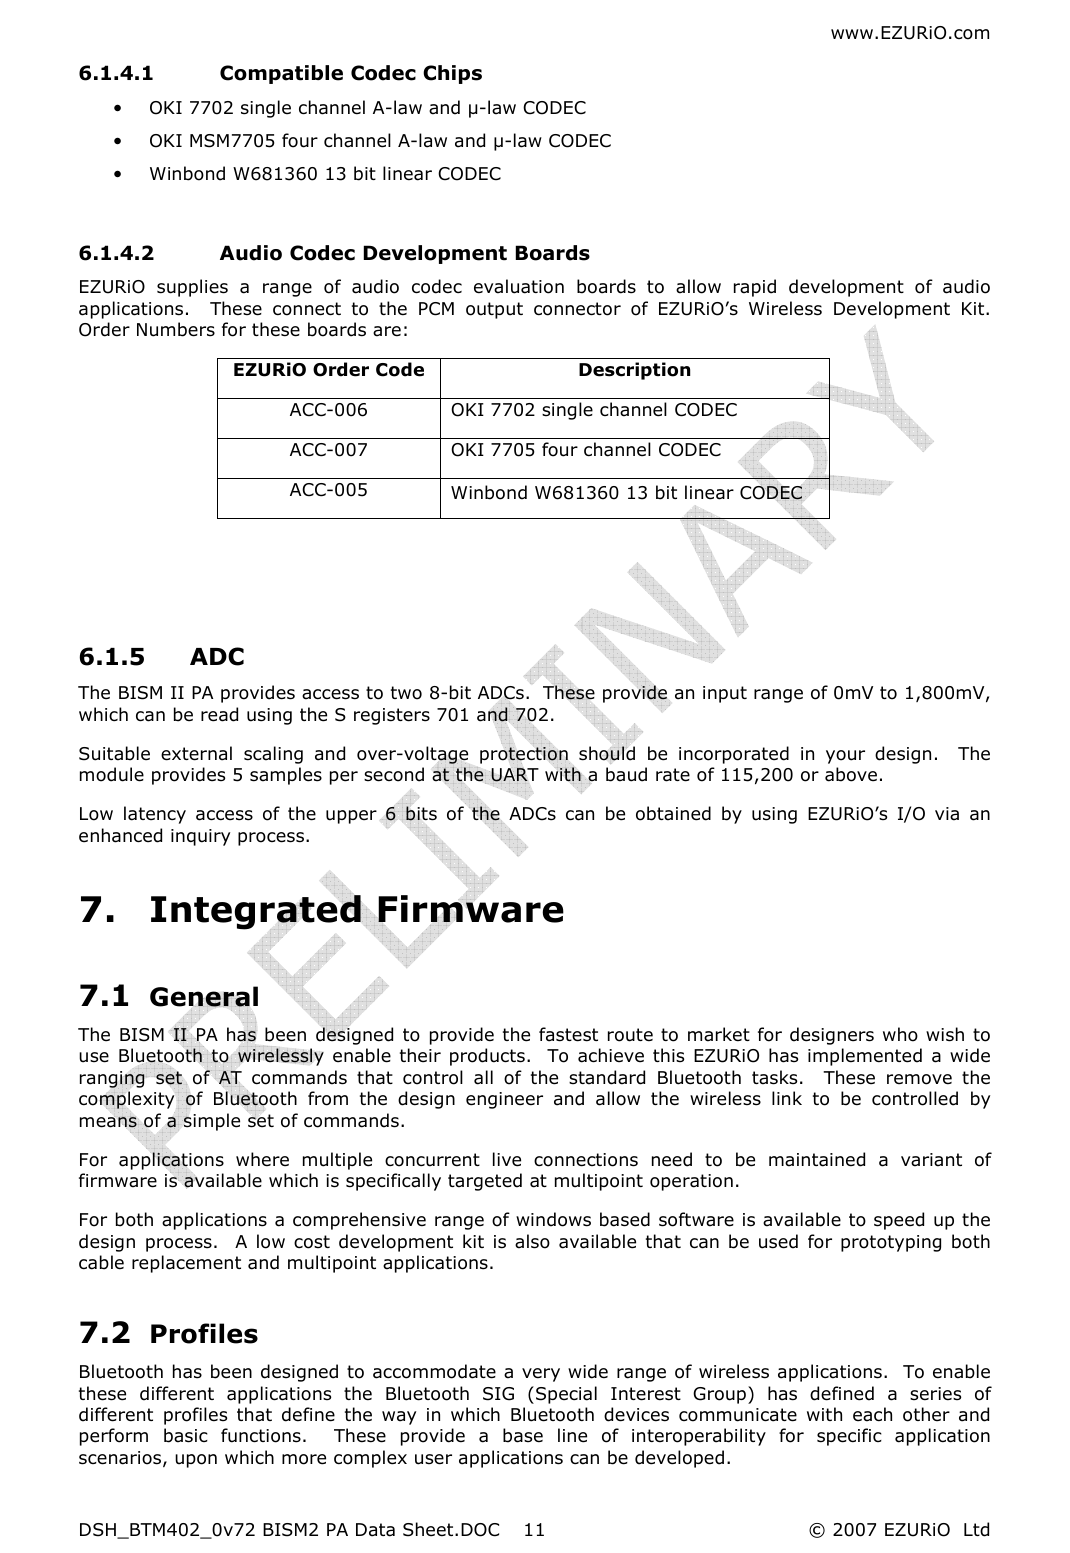 www.EZURiO.com DSH_BTM402_0v72 BISM2 PA Data Sheet.DOC  © 2007 EZURiO  Ltd  116.1.4.1 Compatible Codec Chips • OKI 7702 single channel A-law and µ-law CODEC • OKI MSM7705 four channel A-law and µ-law CODEC • Winbond W681360 13 bit linear CODEC  6.1.4.2 Audio Codec Development Boards EZURiO  supplies  a  range  of  audio  codec  evaluation  boards  to  allow  rapid  development  of  audio applications.    These  connect  to  the  PCM  output  connector  of  EZURiO’s  Wireless  Development  Kit.  Order Numbers for these boards are: EZURiO Order Code  Description ACC-006  OKI 7702 single channel CODEC ACC-007  OKI 7705 four channel CODEC ACC-005  Winbond W681360 13 bit linear CODEC    6.1.5 ADC The BISM II PA provides access to two 8-bit ADCs.  These provide an input range of 0mV to 1,800mV, which can be read using the S registers 701 and 702. Suitable  external  scaling  and  over-voltage  protection  should  be  incorporated  in  your  design.    The module provides 5 samples per second at the UART with a baud rate of 115,200 or above.  Low  latency  access  of  the  upper  6  bits  of  the  ADCs  can  be  obtained  by  using  EZURiO’s  I/O  via  an enhanced inquiry process. 7. Integrated Firmware 7.1 General The BISM II PA has been designed to provide the fastest route to market for designers who wish to use  Bluetooth to  wirelessly  enable their products.  To achieve this EZURiO has implemented a wide ranging  set  of  AT  commands  that  control  all  of  the  standard  Bluetooth  tasks.    These  remove  the complexity  of  Bluetooth  from  the  design  engineer  and  allow  the  wireless  link  to  be  controlled  by means of a simple set of commands. For  applications  where  multiple  concurrent  live  connections  need  to  be  maintained  a  variant  of firmware is available which is specifically targeted at multipoint operation. For both applications a comprehensive range of windows based software is available to speed up the design  process.    A low cost development  kit  is  also  available that can be used for prototyping both cable replacement and multipoint applications. 7.2 Profiles Bluetooth has been designed to accommodate a very wide range of wireless applications.  To enable these  different  applications  the  Bluetooth  SIG  (Special  Interest  Group)  has  defined  a  series  of different  profiles  that  define  the  way  in  which  Bluetooth  devices  communicate  with  each  other  and perform  basic  functions.    These  provide  a  base  line  of  interoperability  for  specific  application scenarios, upon which more complex user applications can be developed. 